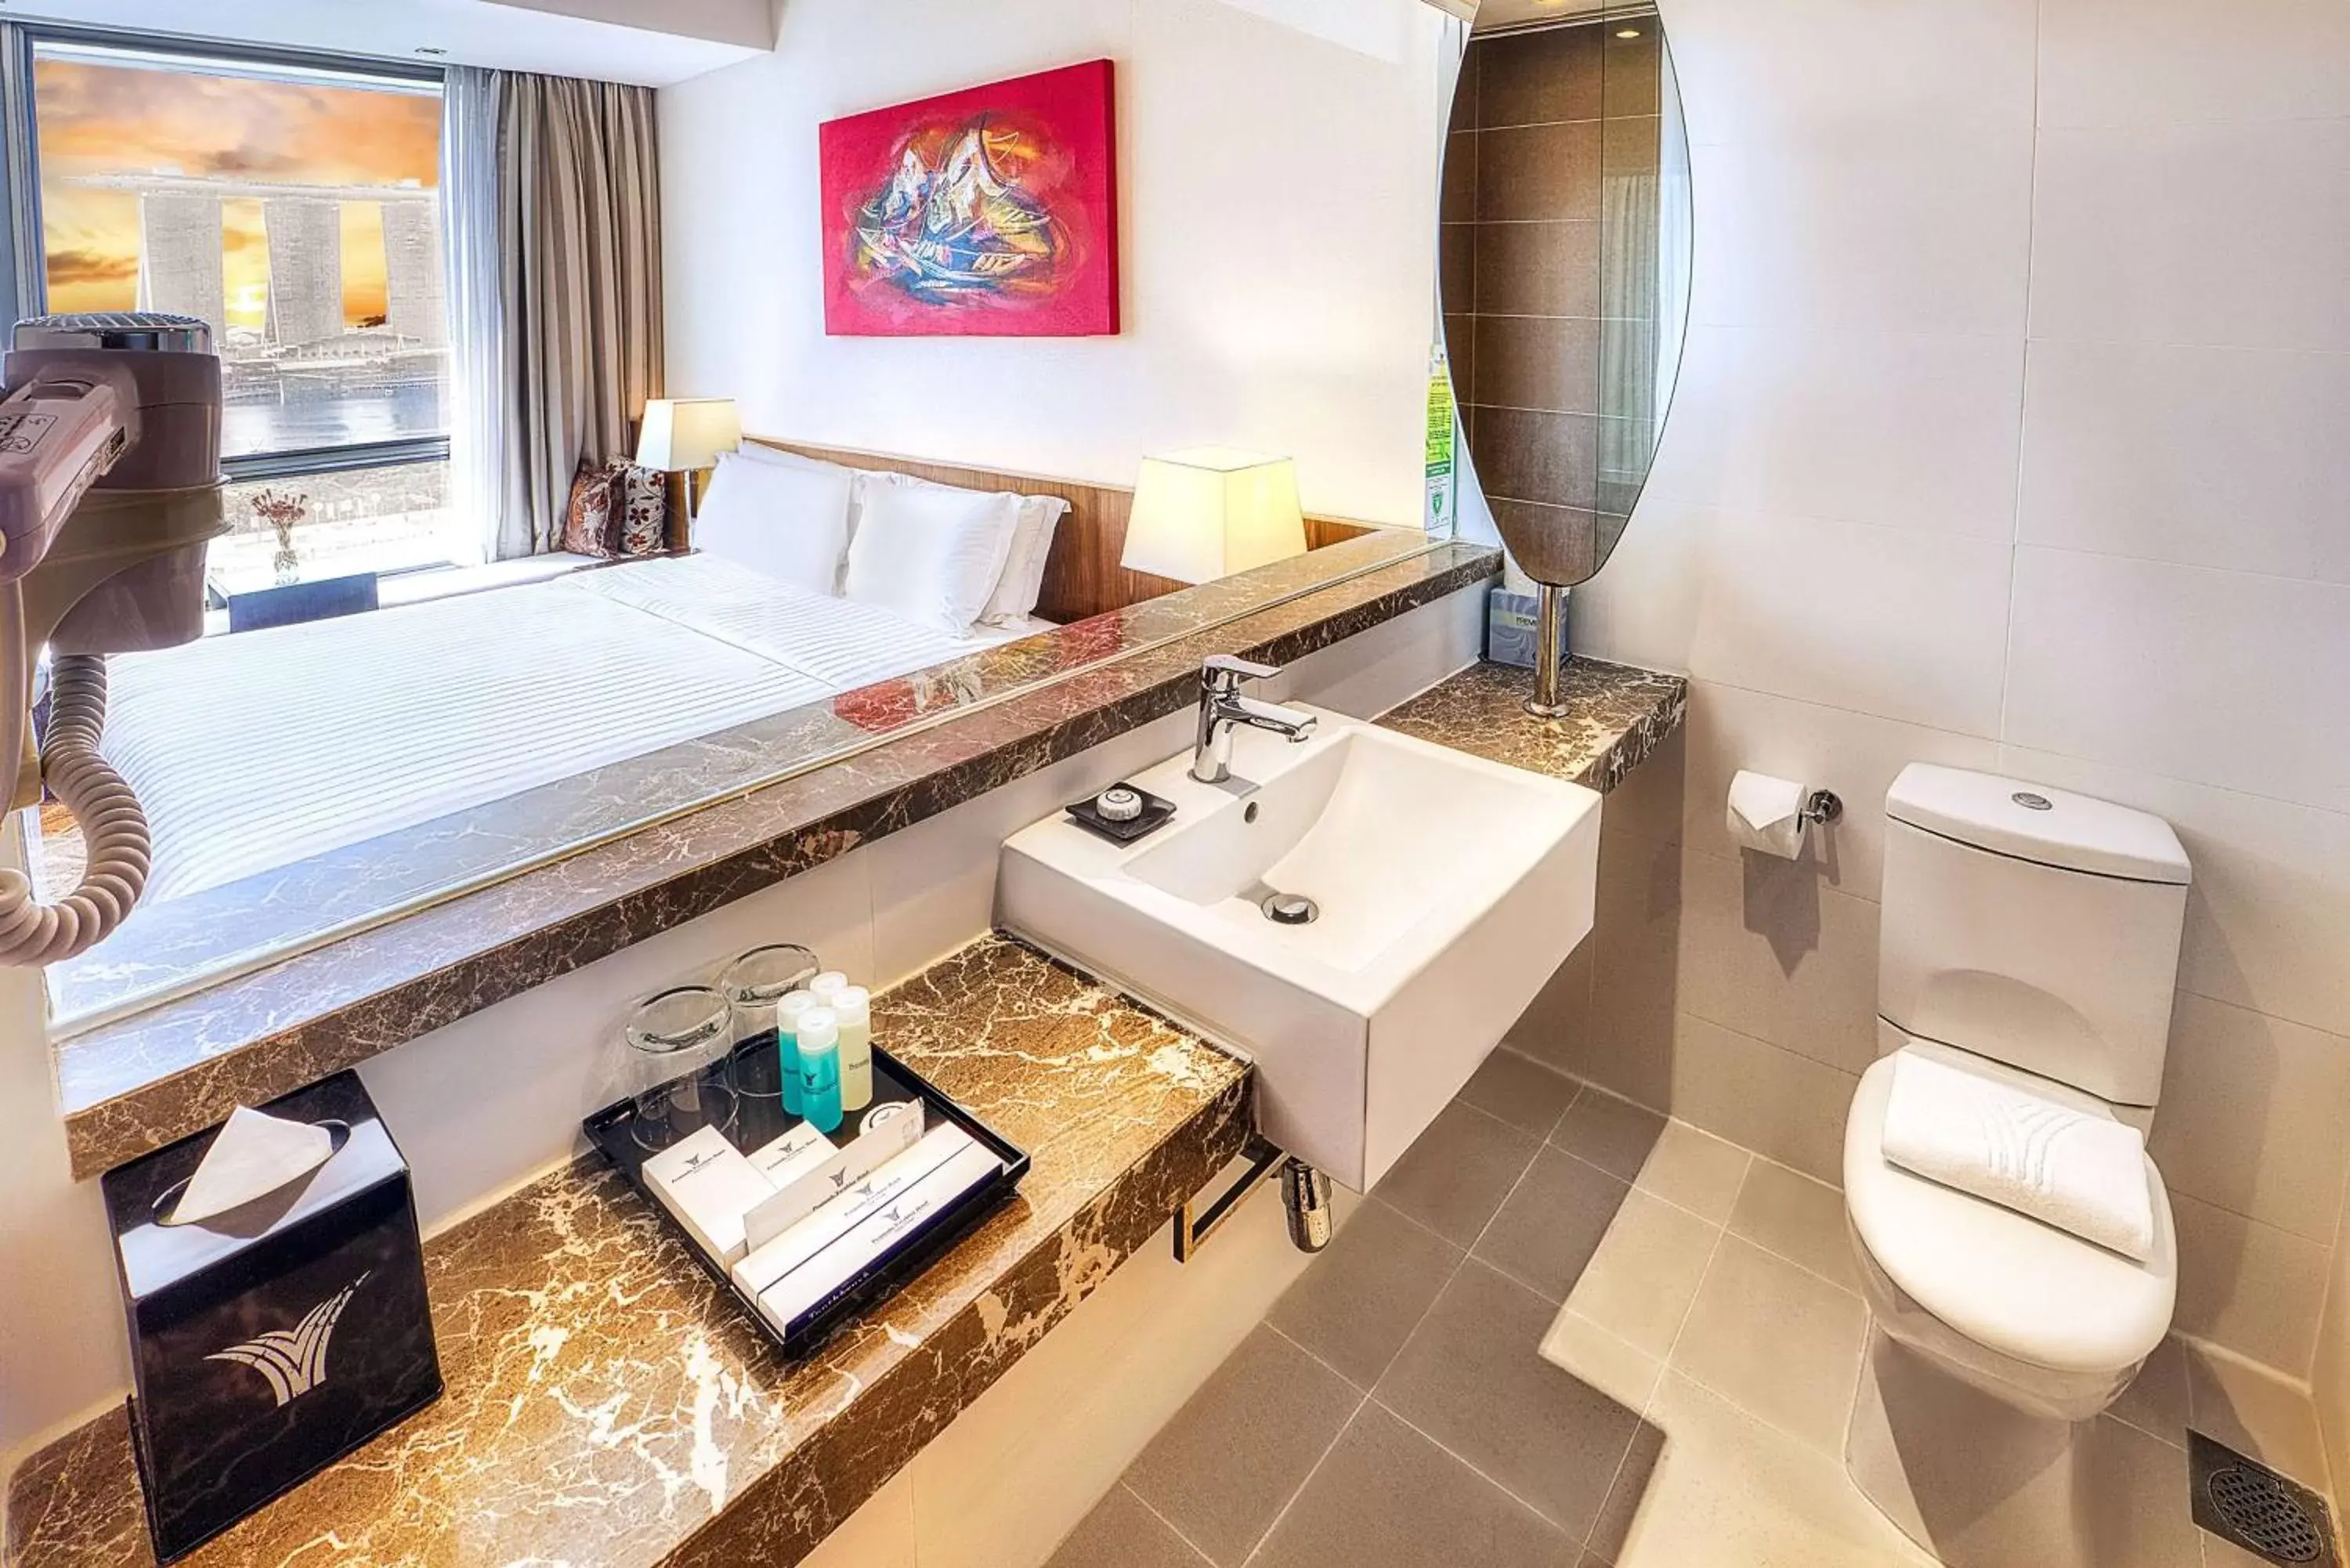 TV and multimedia, Bathroom in Peninsula Excelsior Singapore, A Wyndham Hotel